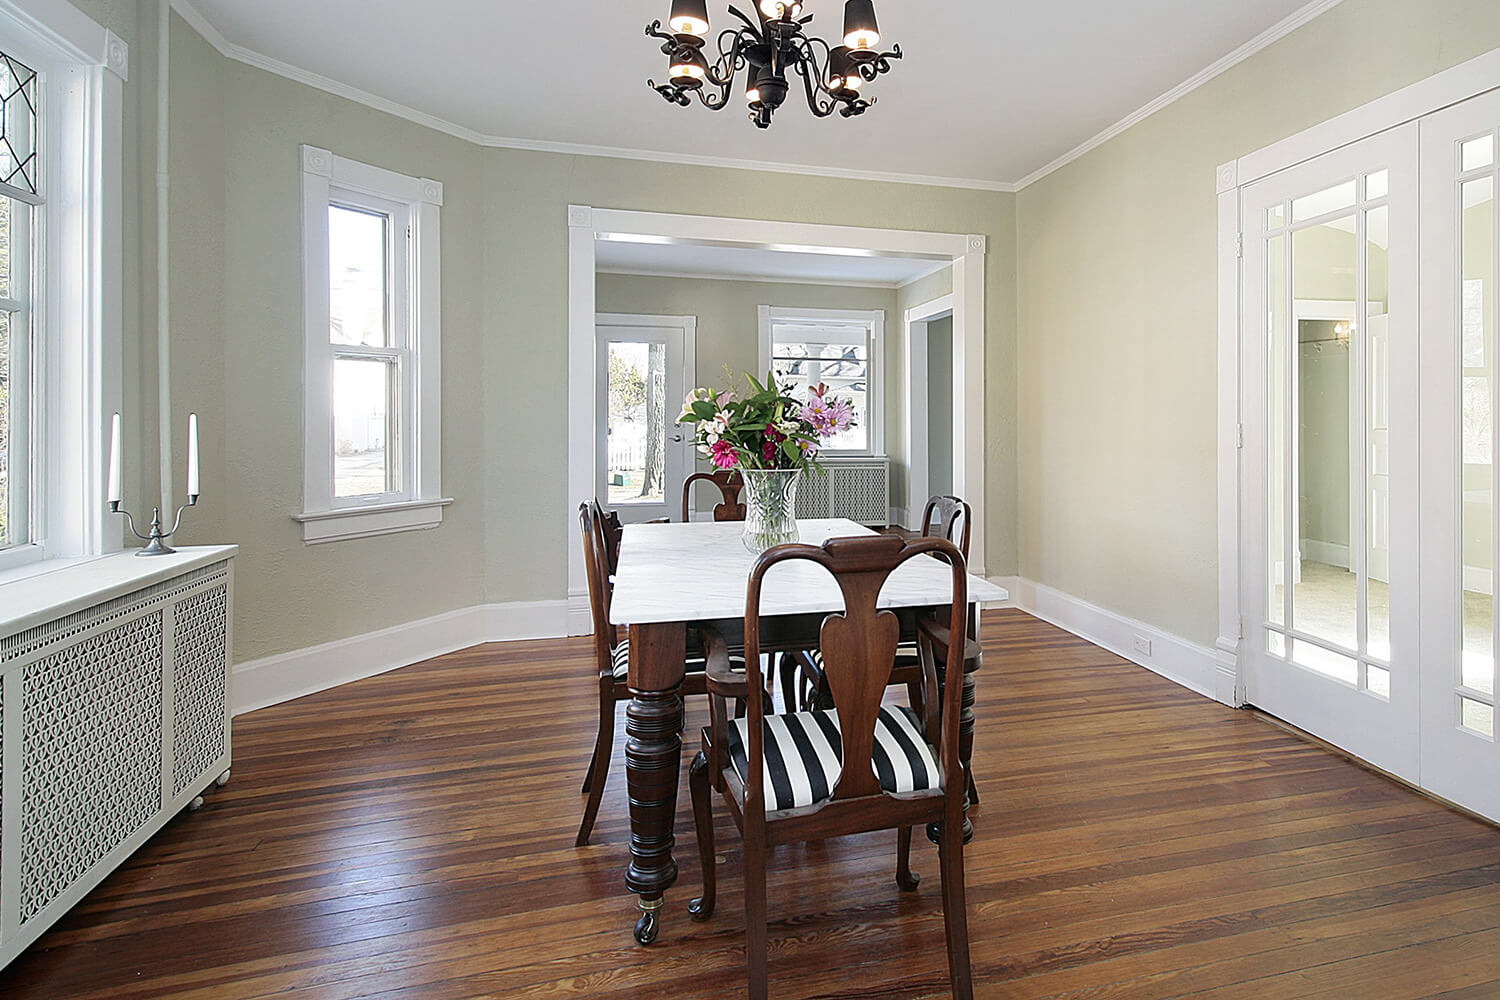 Different Types of Wood Floors